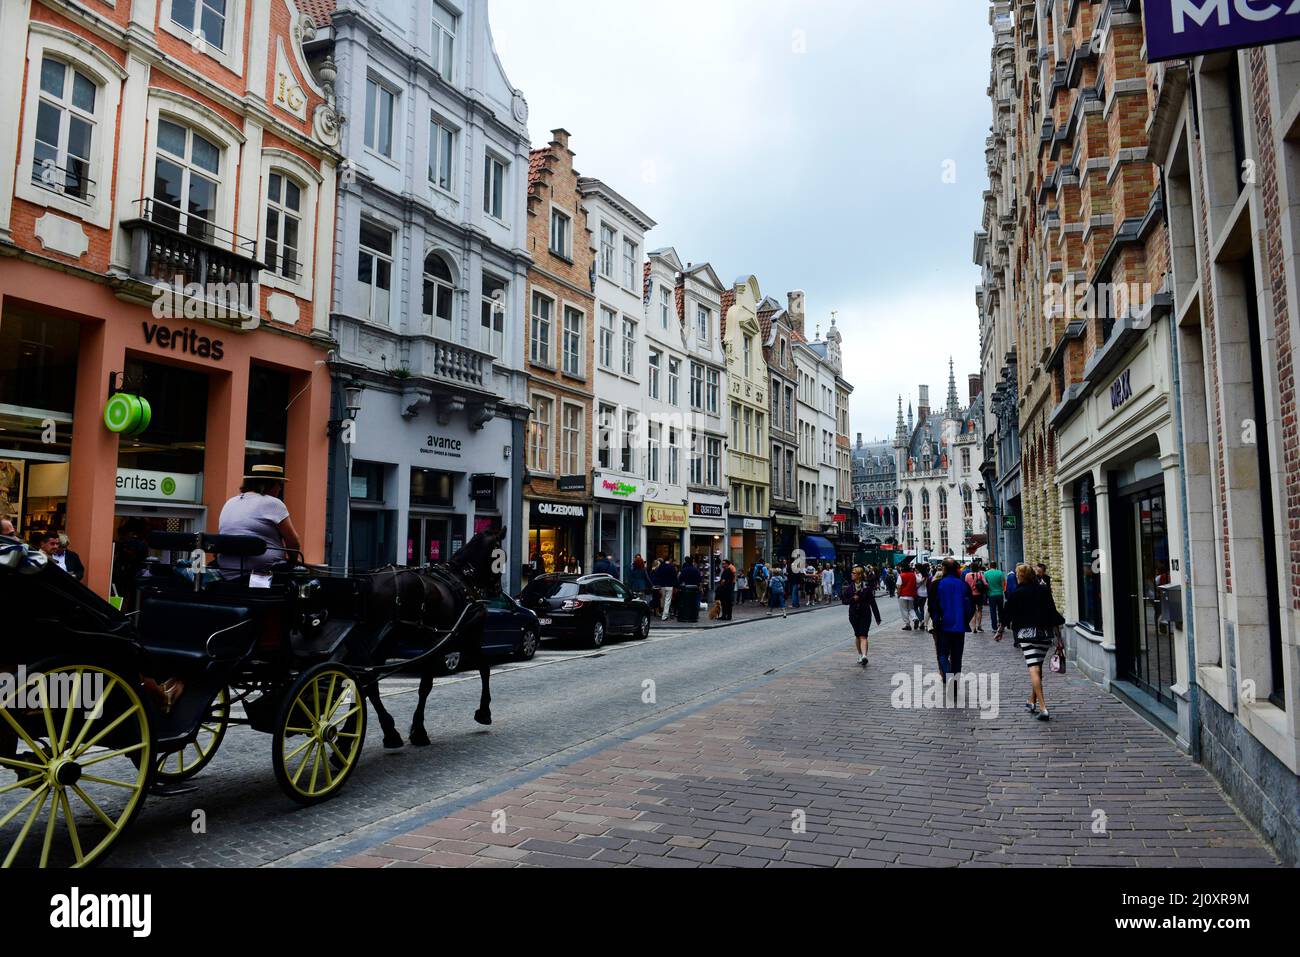 A horse carriage on Steenstraat in the historical center of Bruges, Belgium. Stock Photo